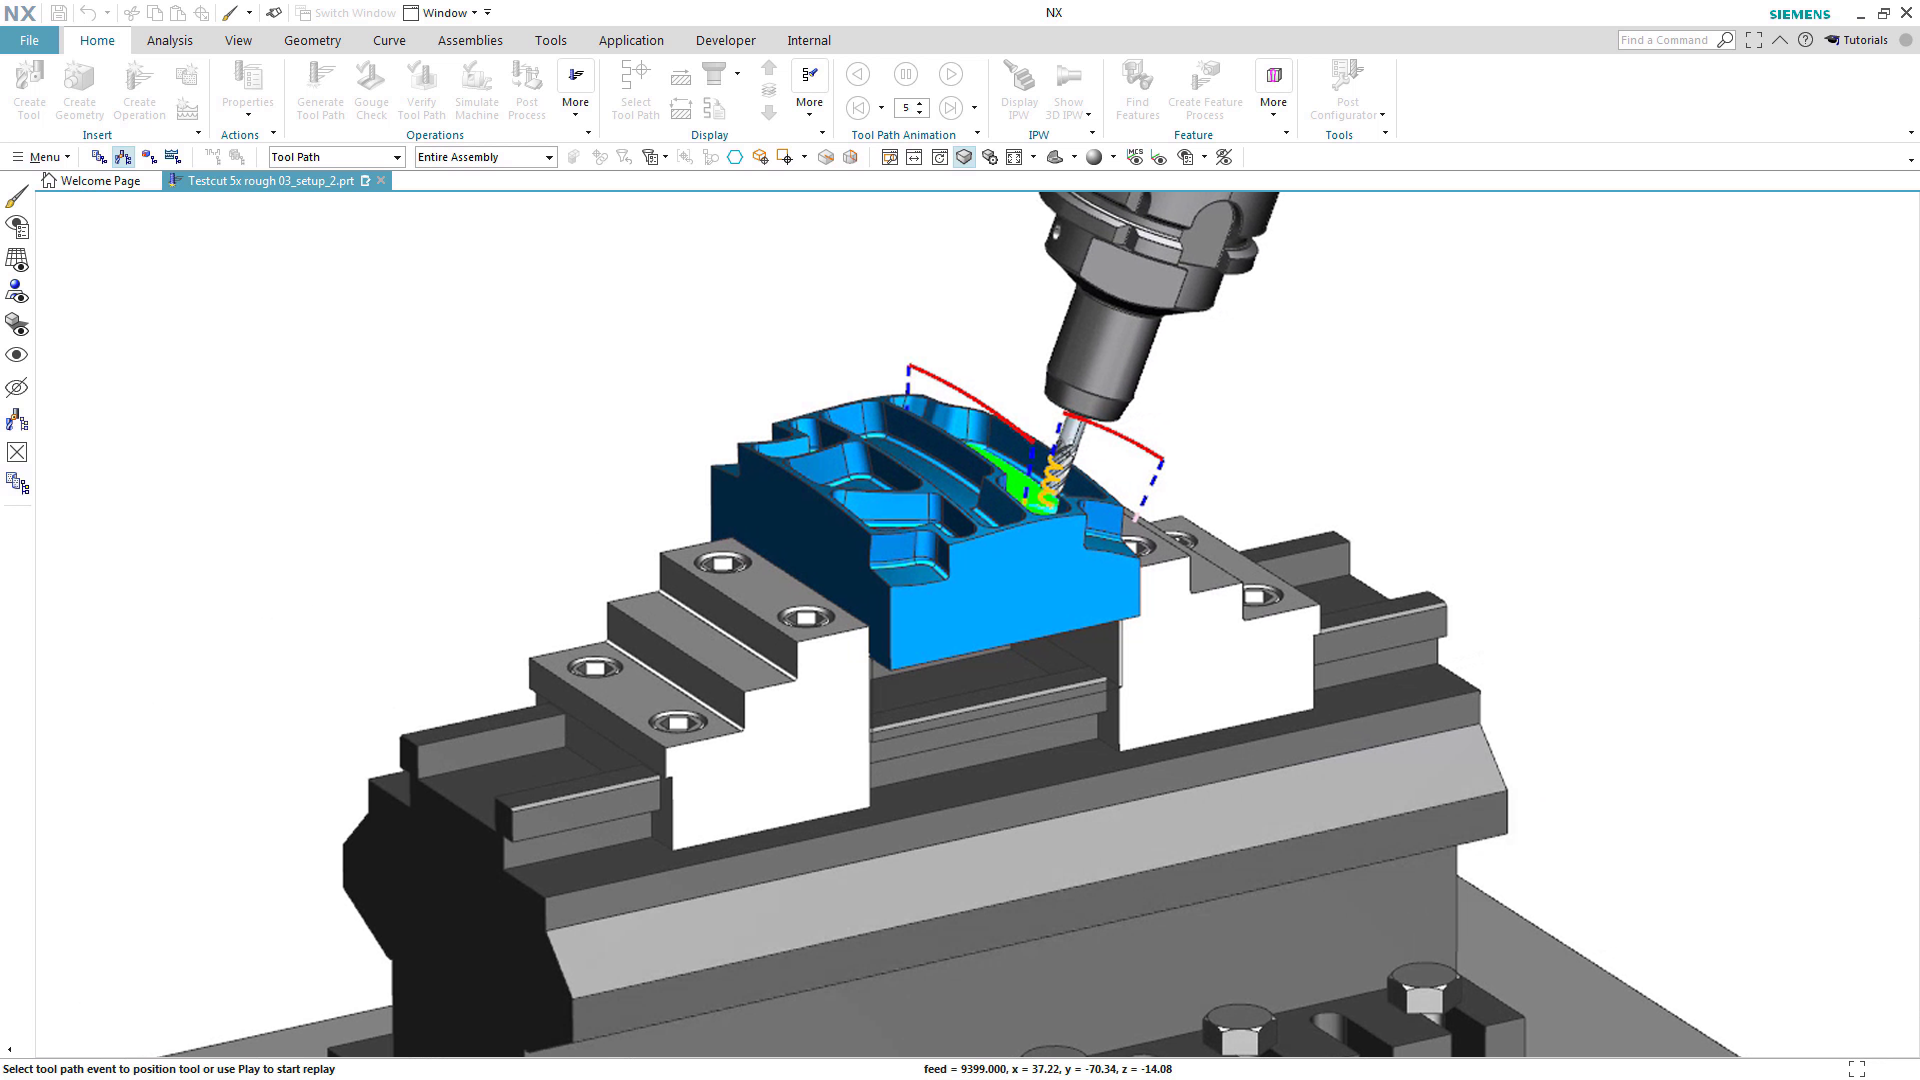 Siemens NX CAM Delivers New Capabilities in the Latest Release